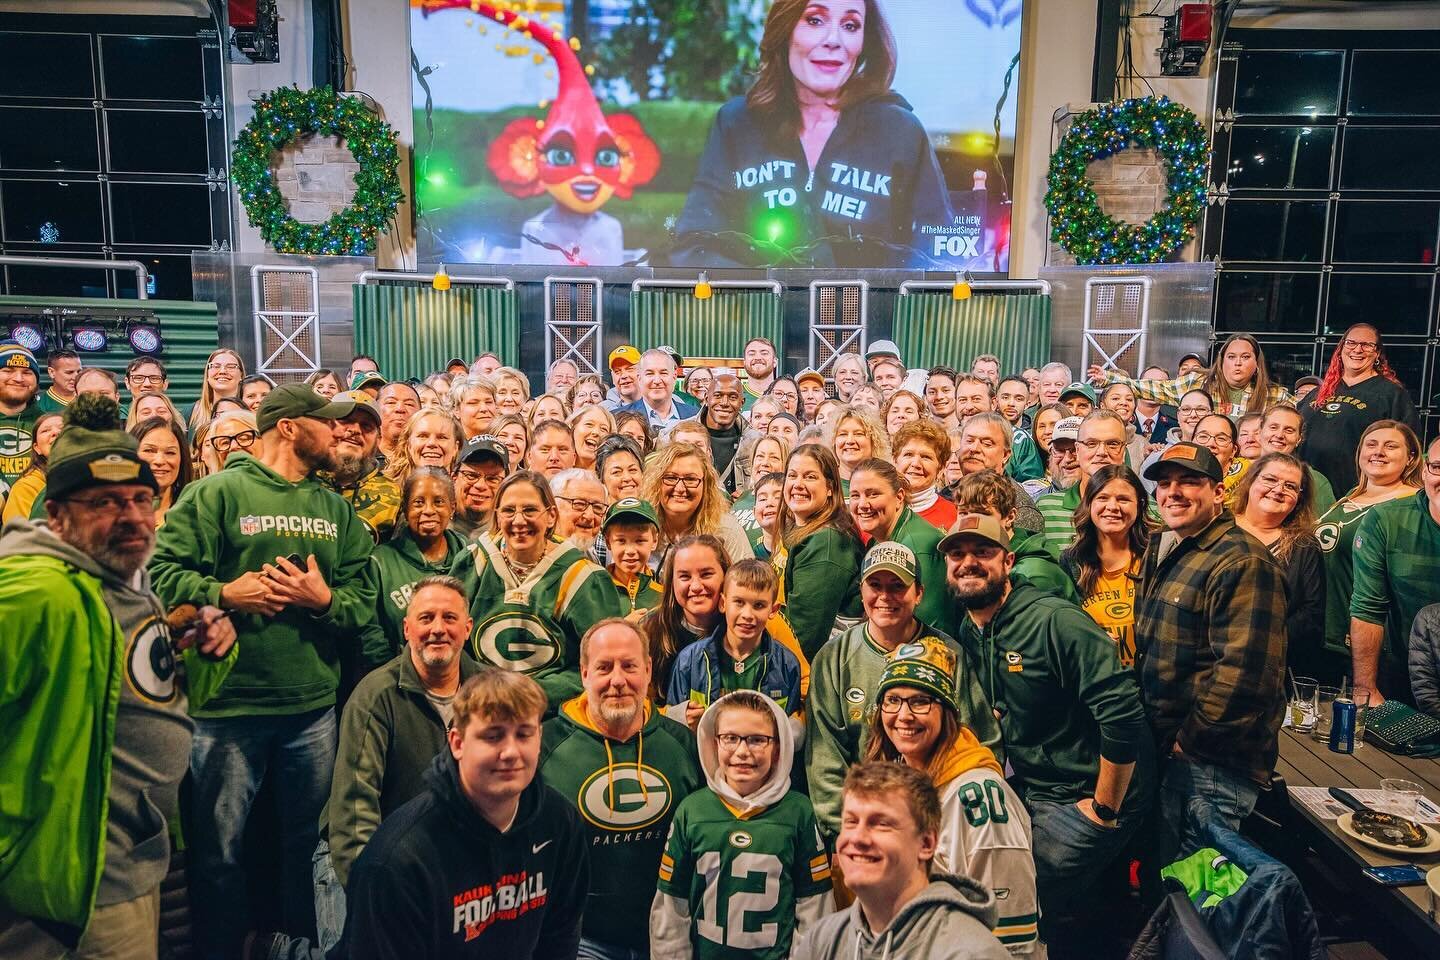 It&rsquo;s always a full house when @donald_driver80 is back in town 🔥 

📸 Check out some of our favorite moments from last nights @networkhealthwi takeover show